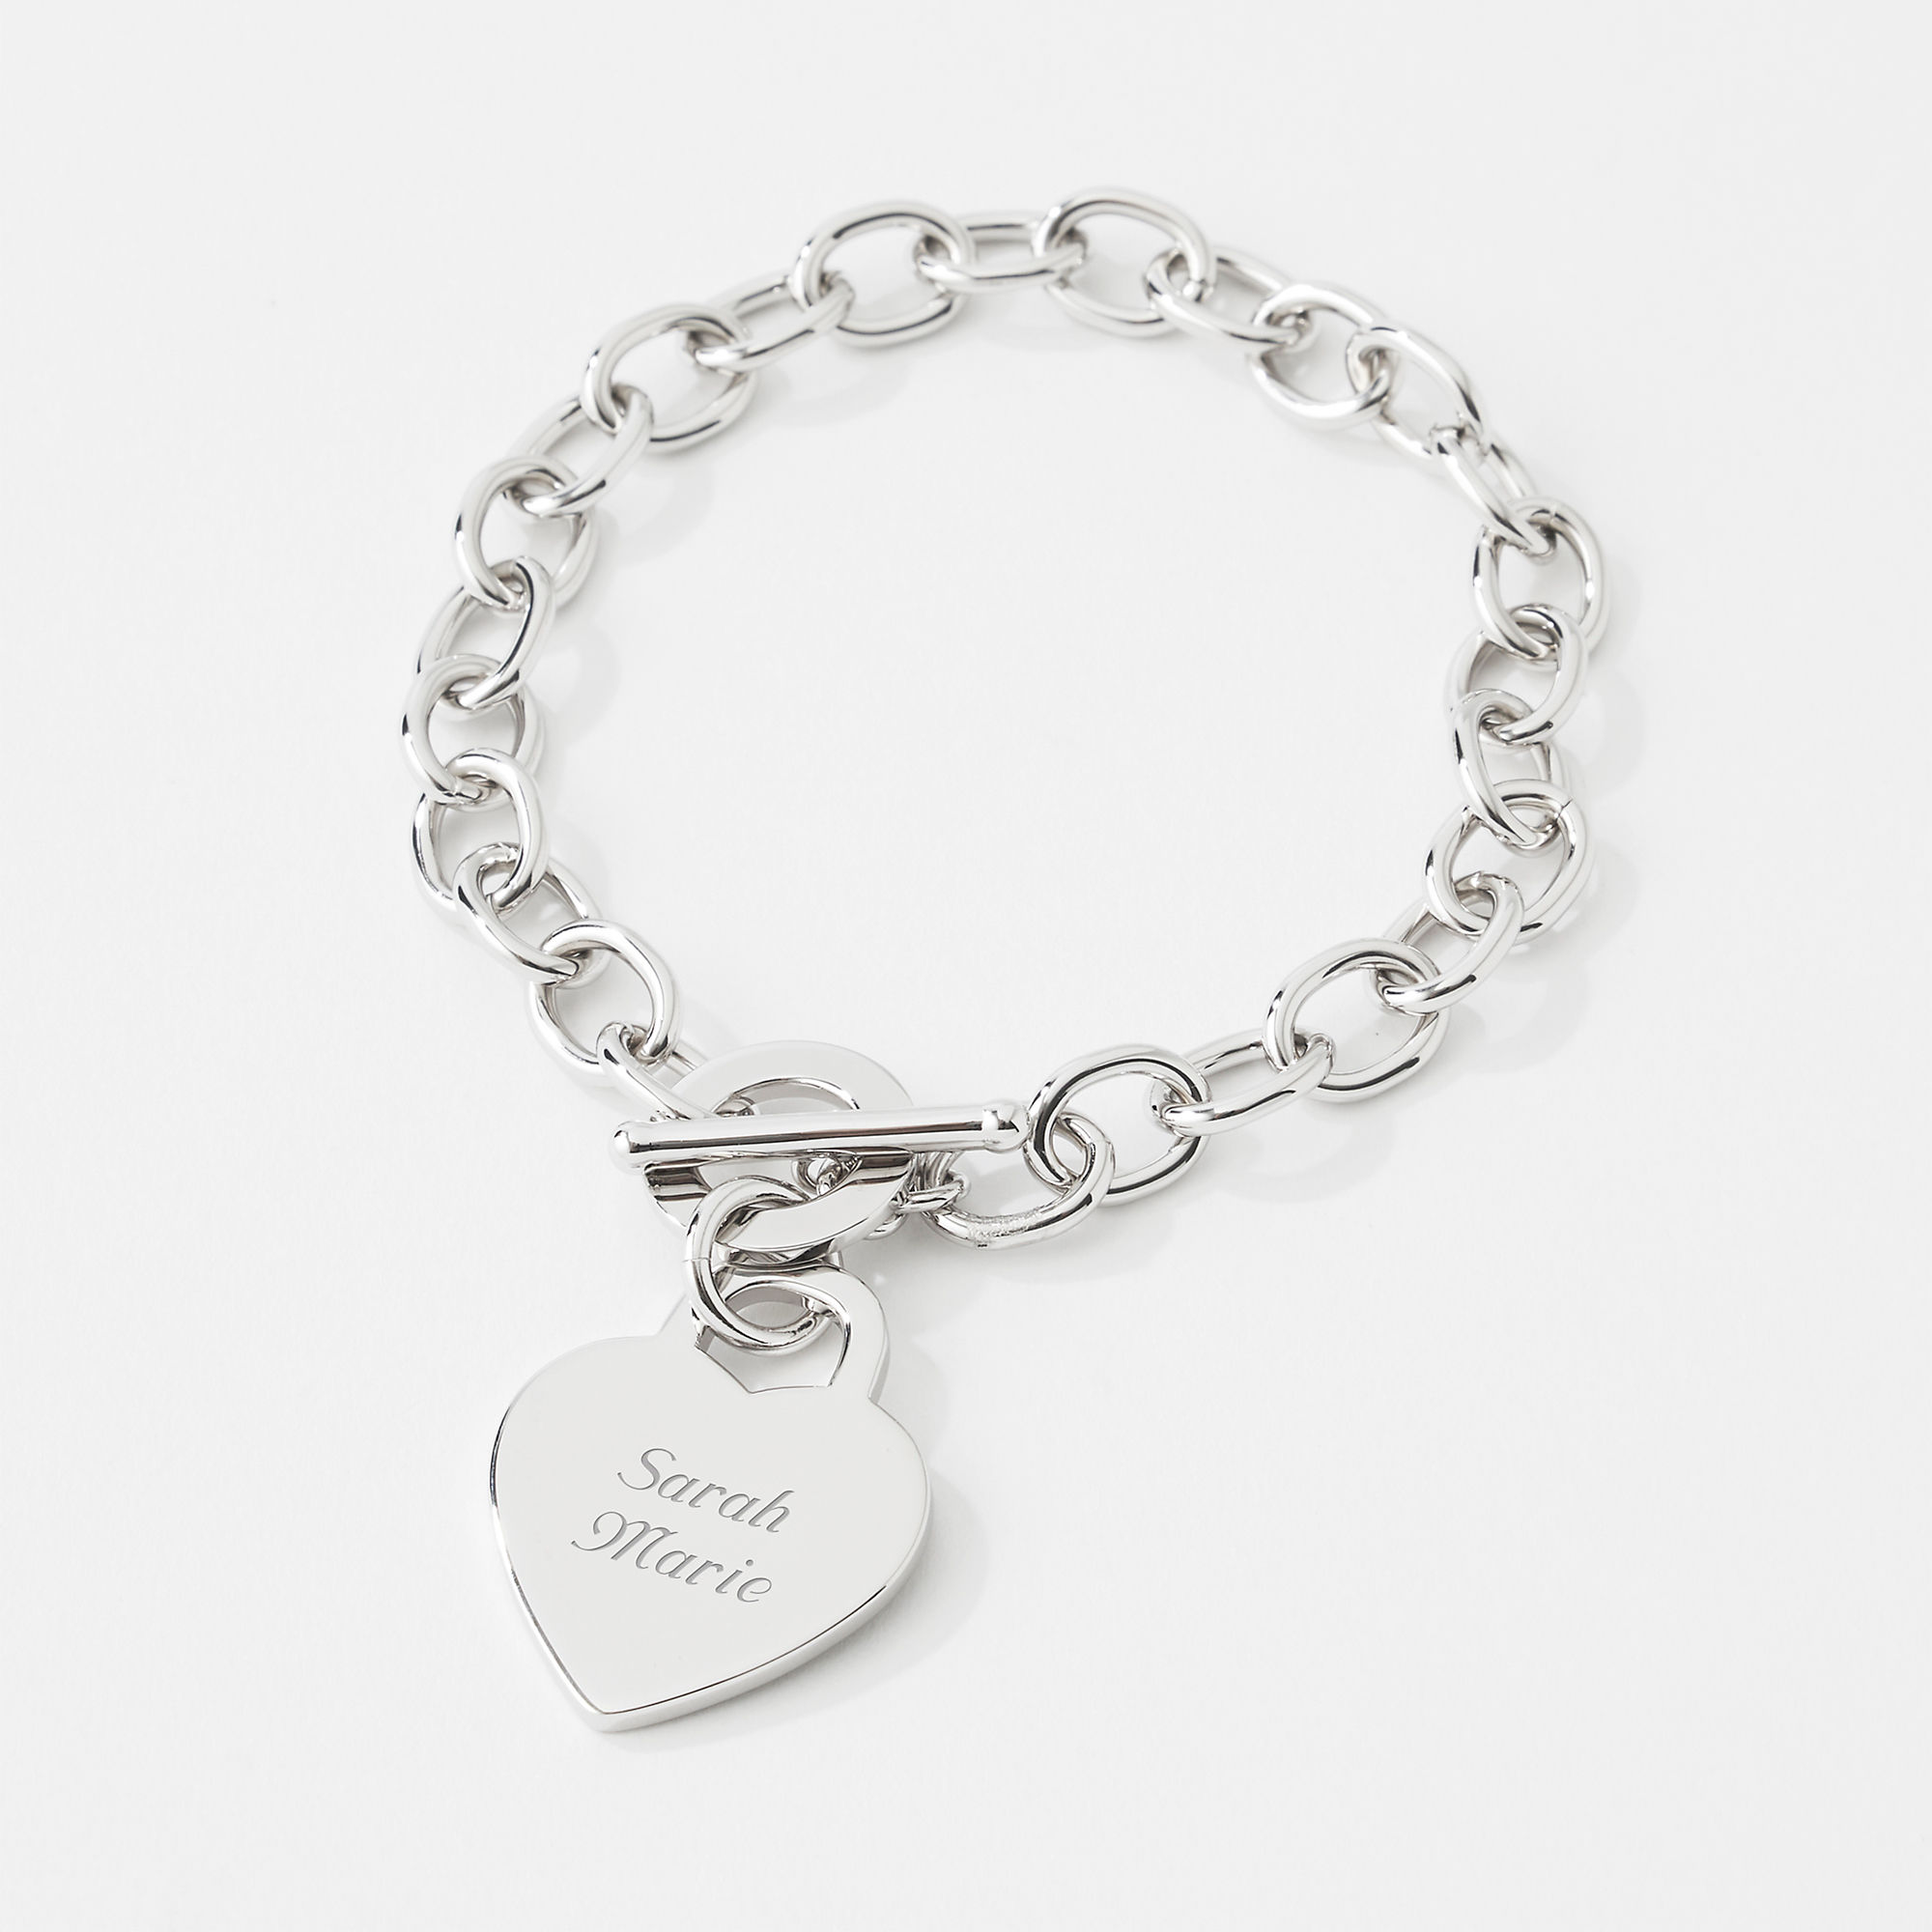 Christening Day Bracelet with Engraving on Heart Charm Personalised Jewellery 